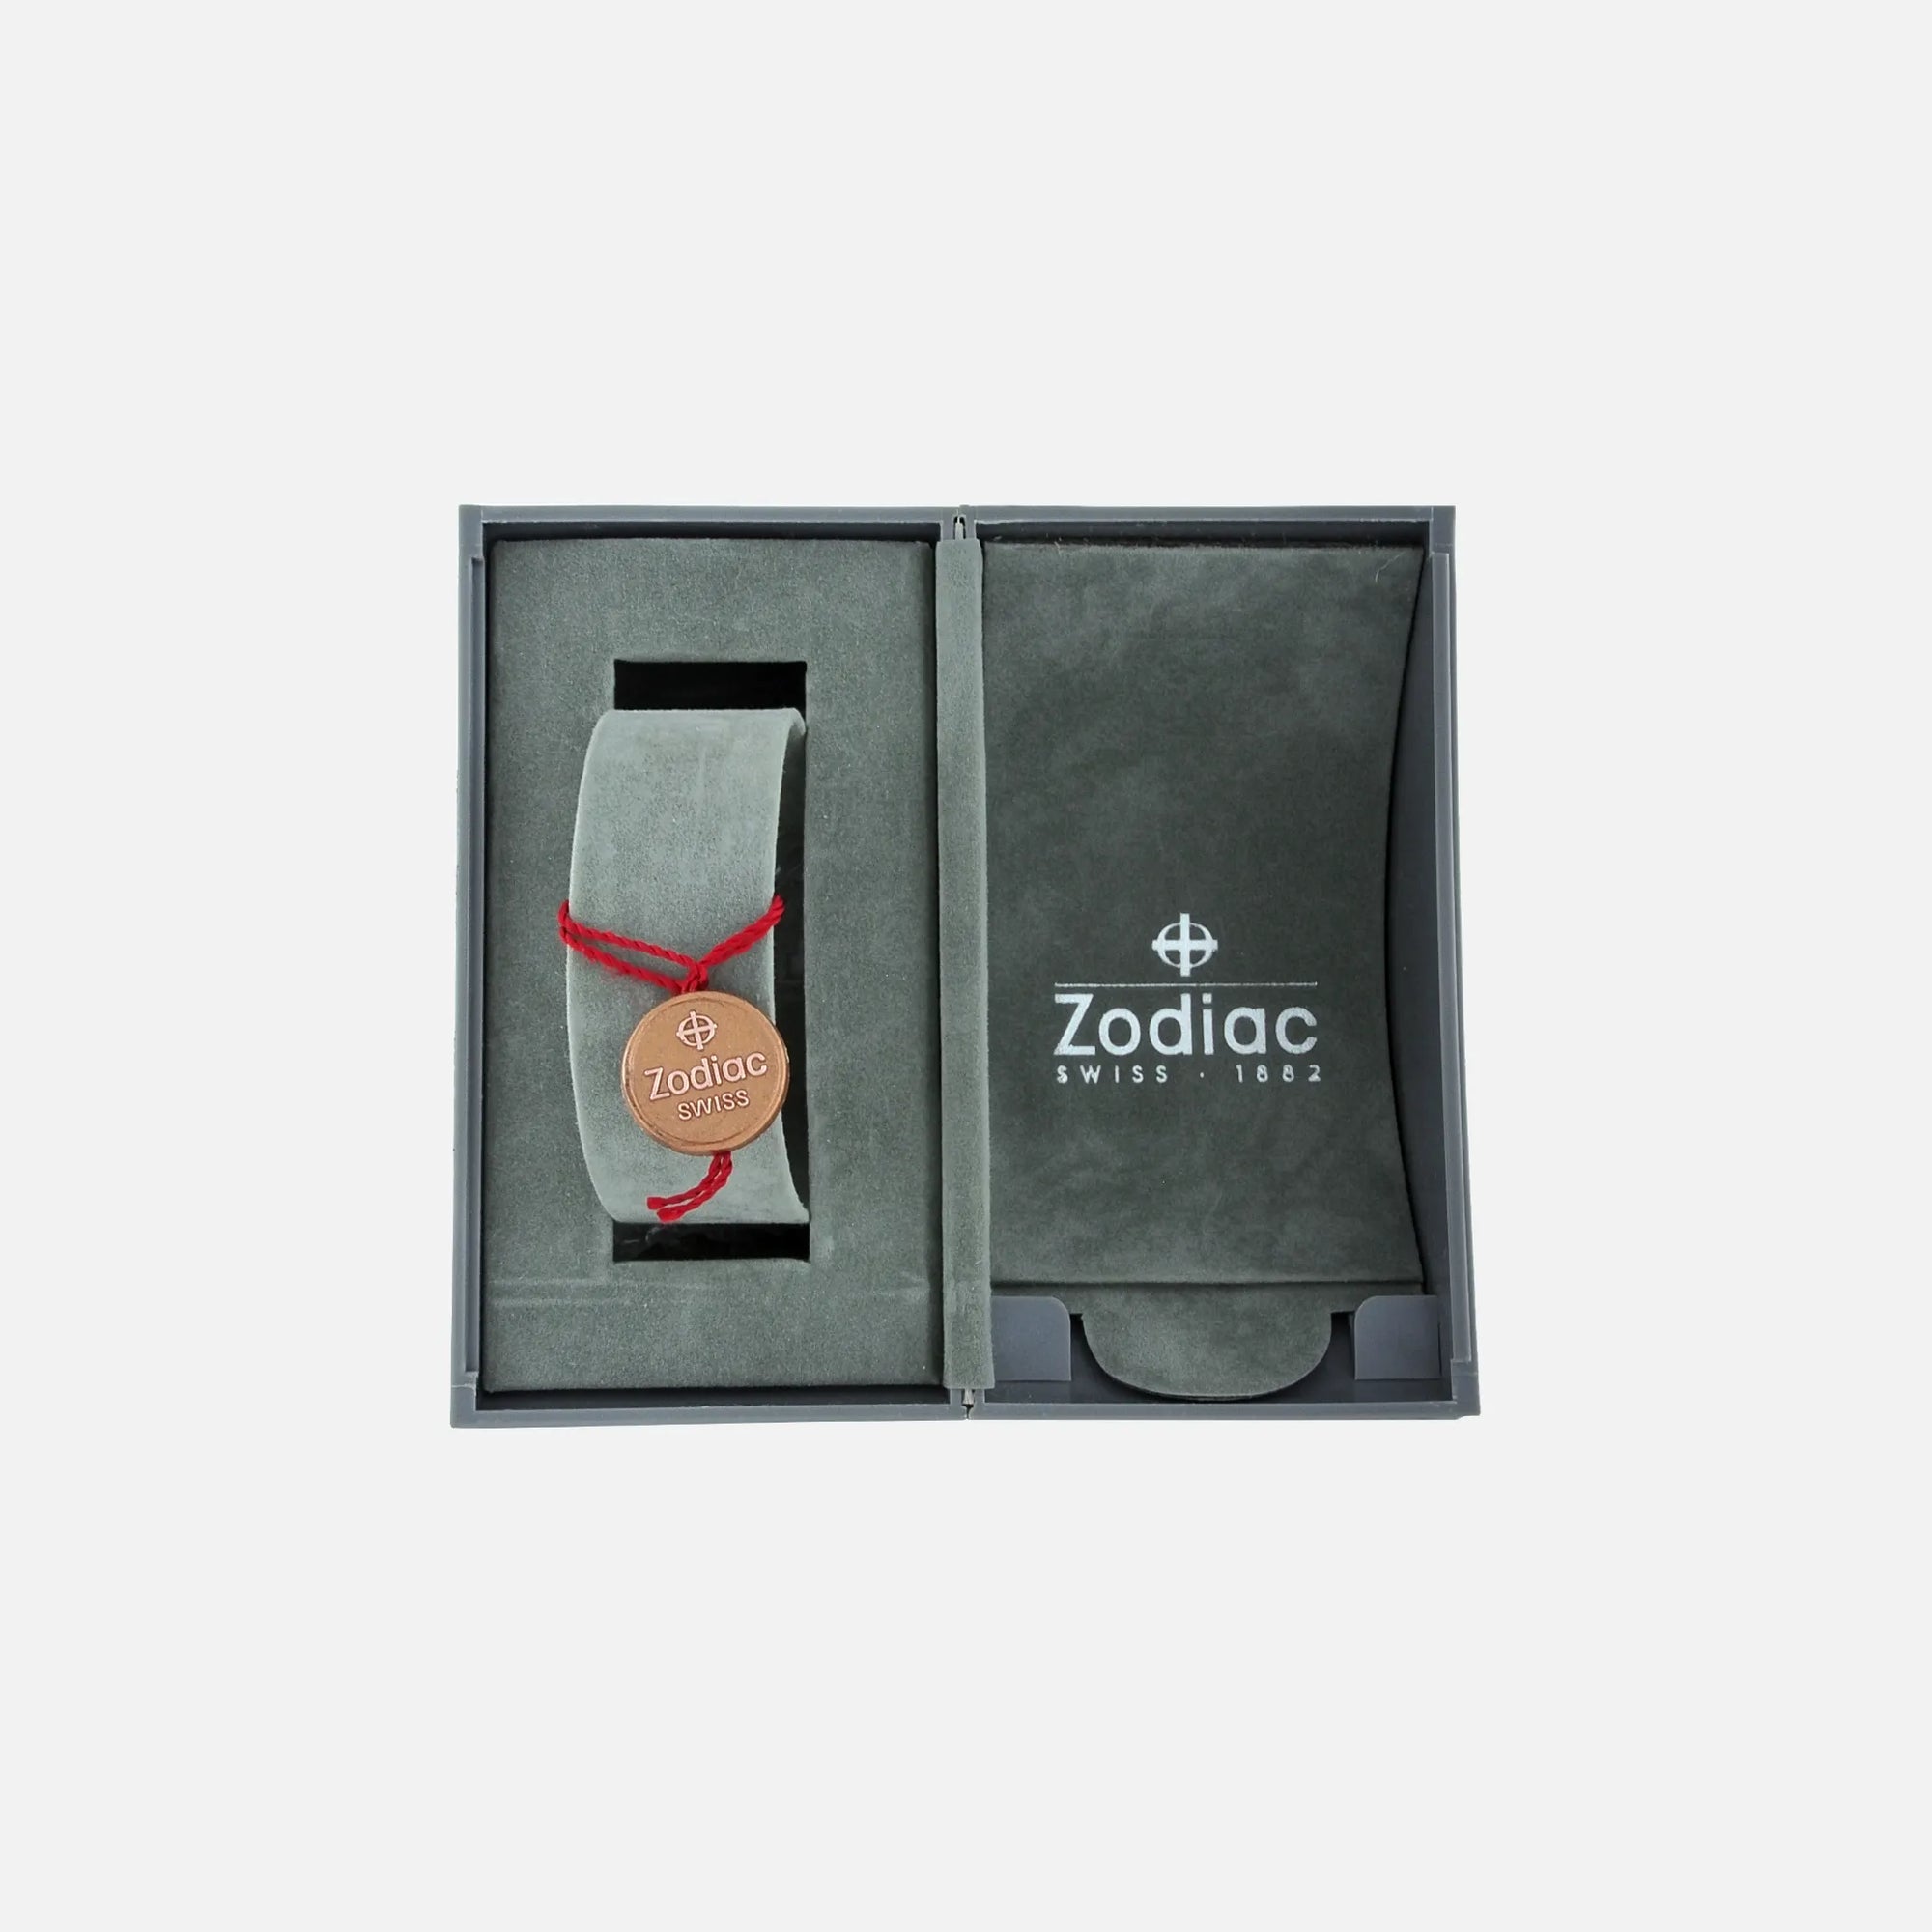 1970s - 1980s Zodiac Vintage Watch Box for sale on Vintage Watch Leader